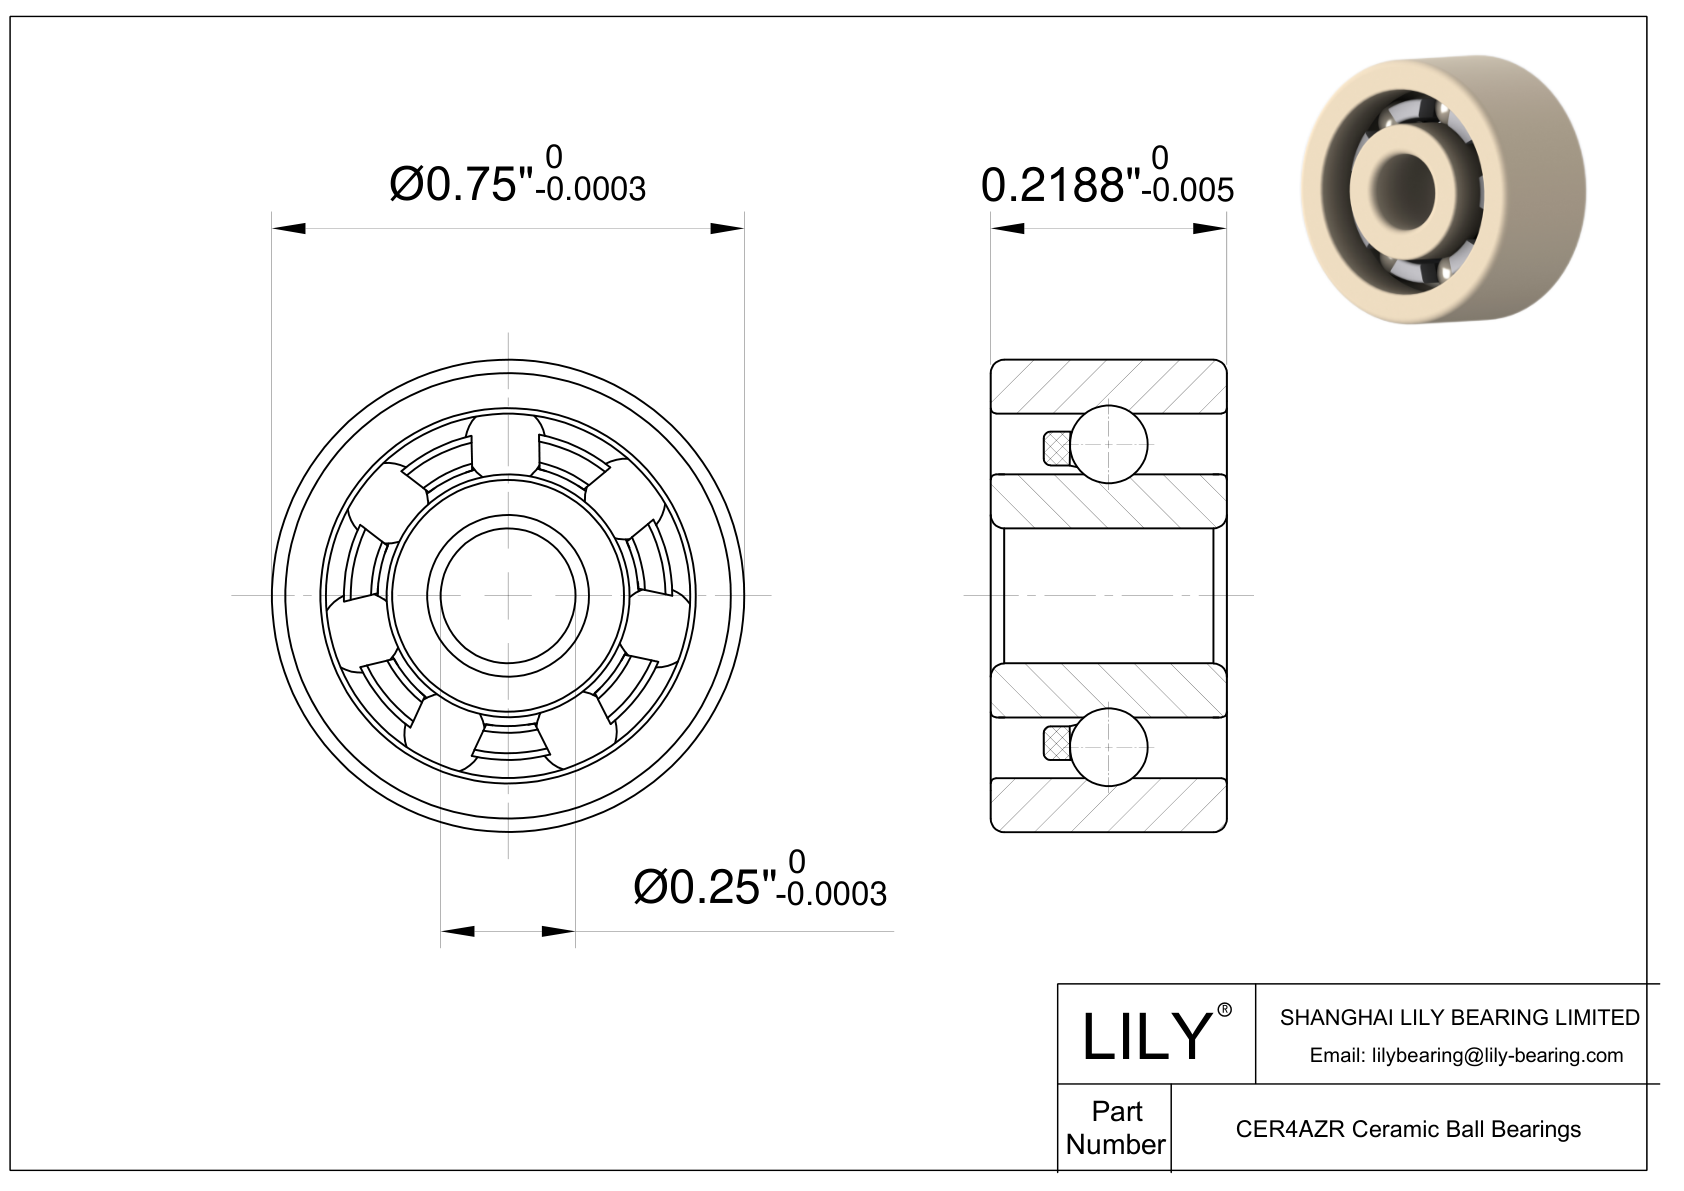 CEZR R4A Inch Size Zirconia Ceramic Bearings cad drawing